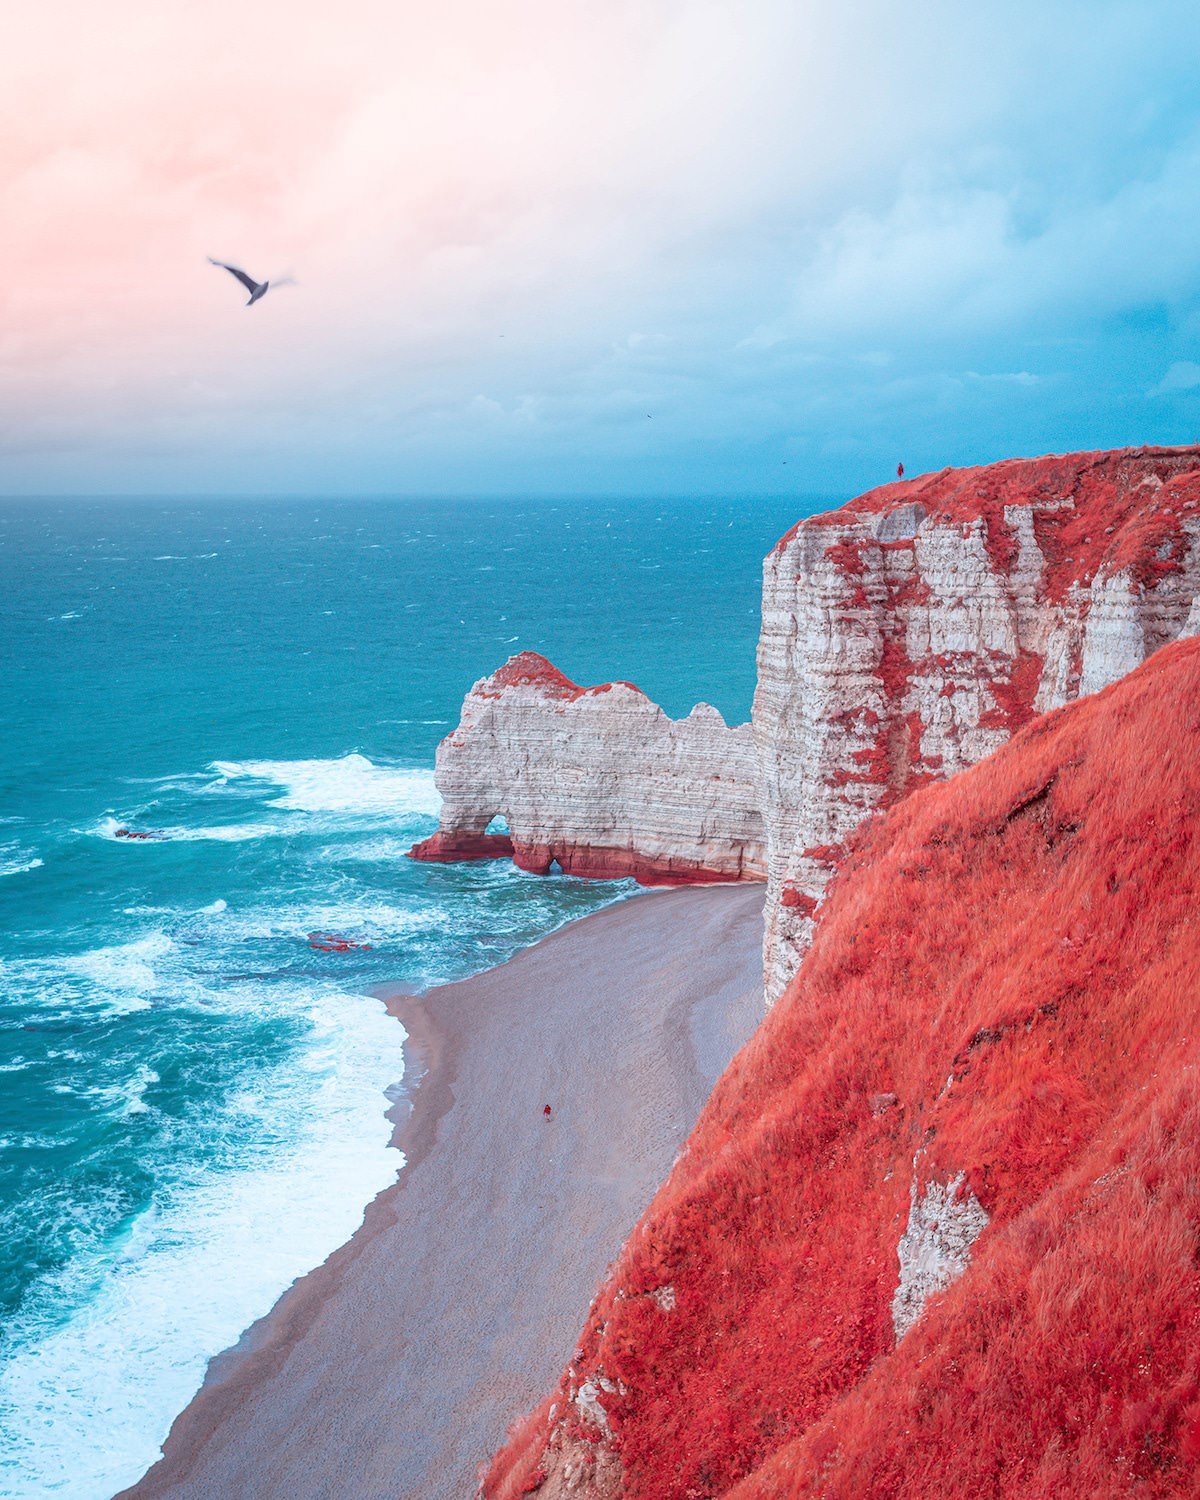 Landscapes of France - French coast next to the cliff and the bird